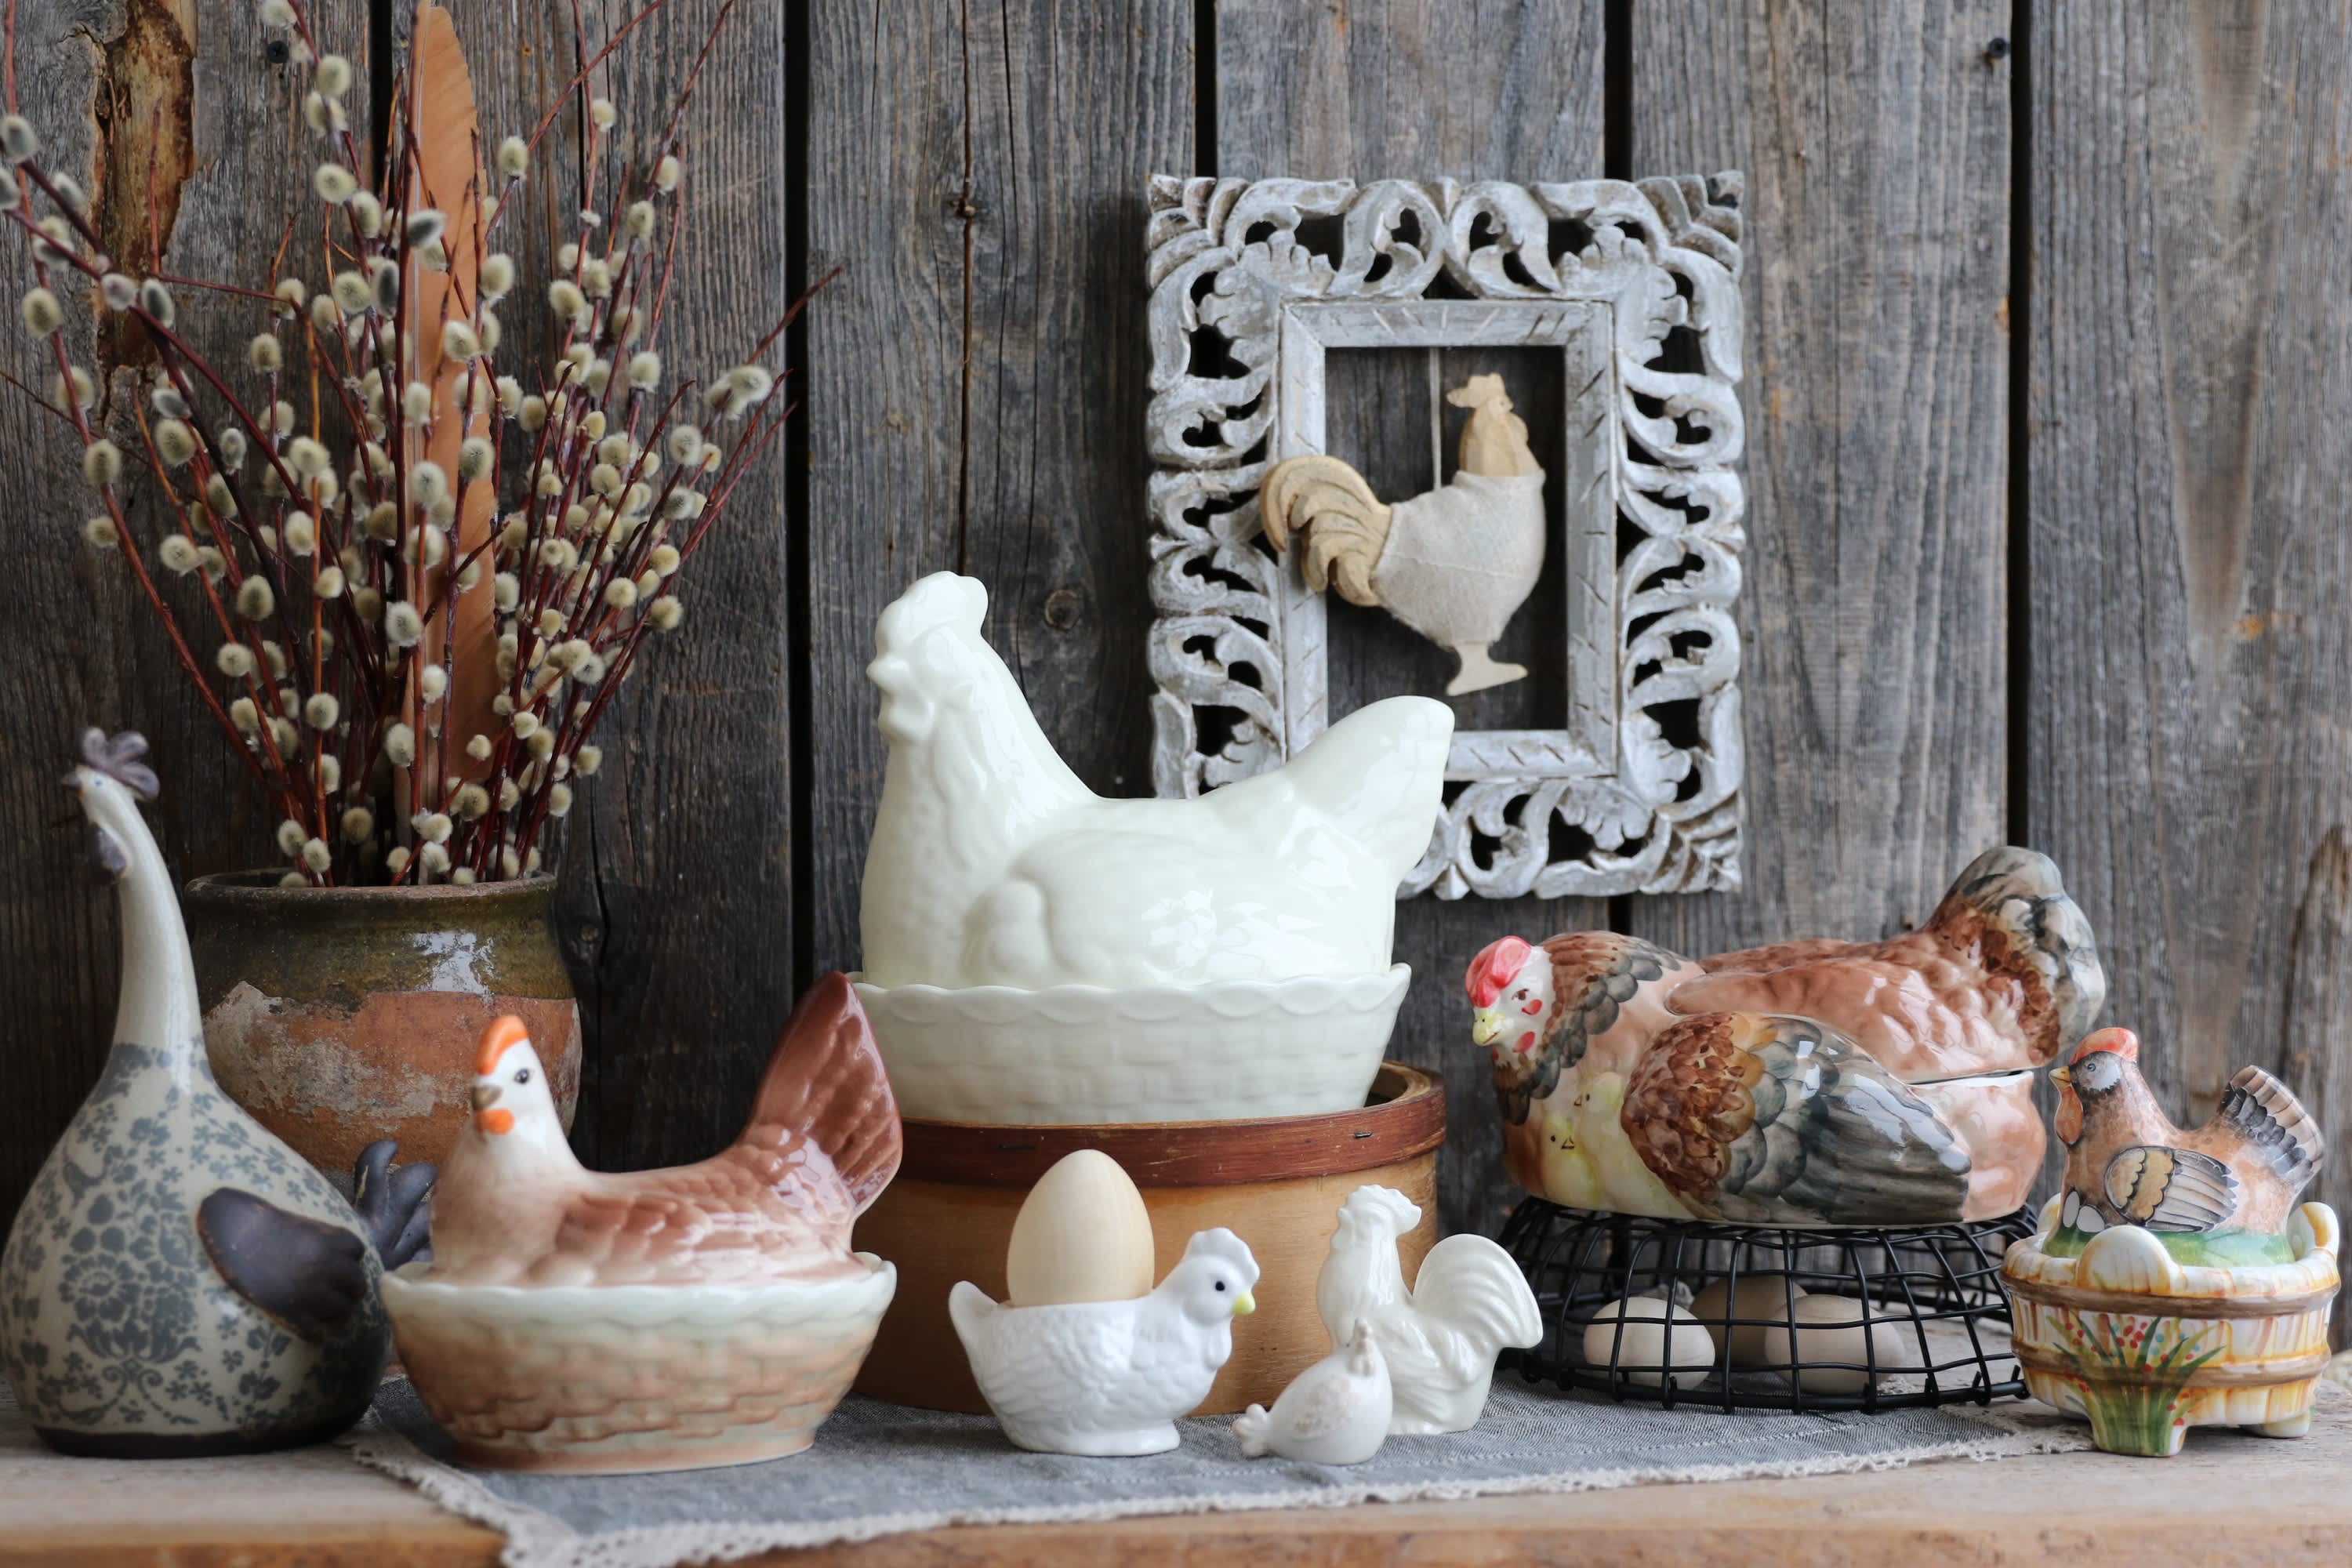 Rooster Decor Is Back in Style — Here's What to Shop